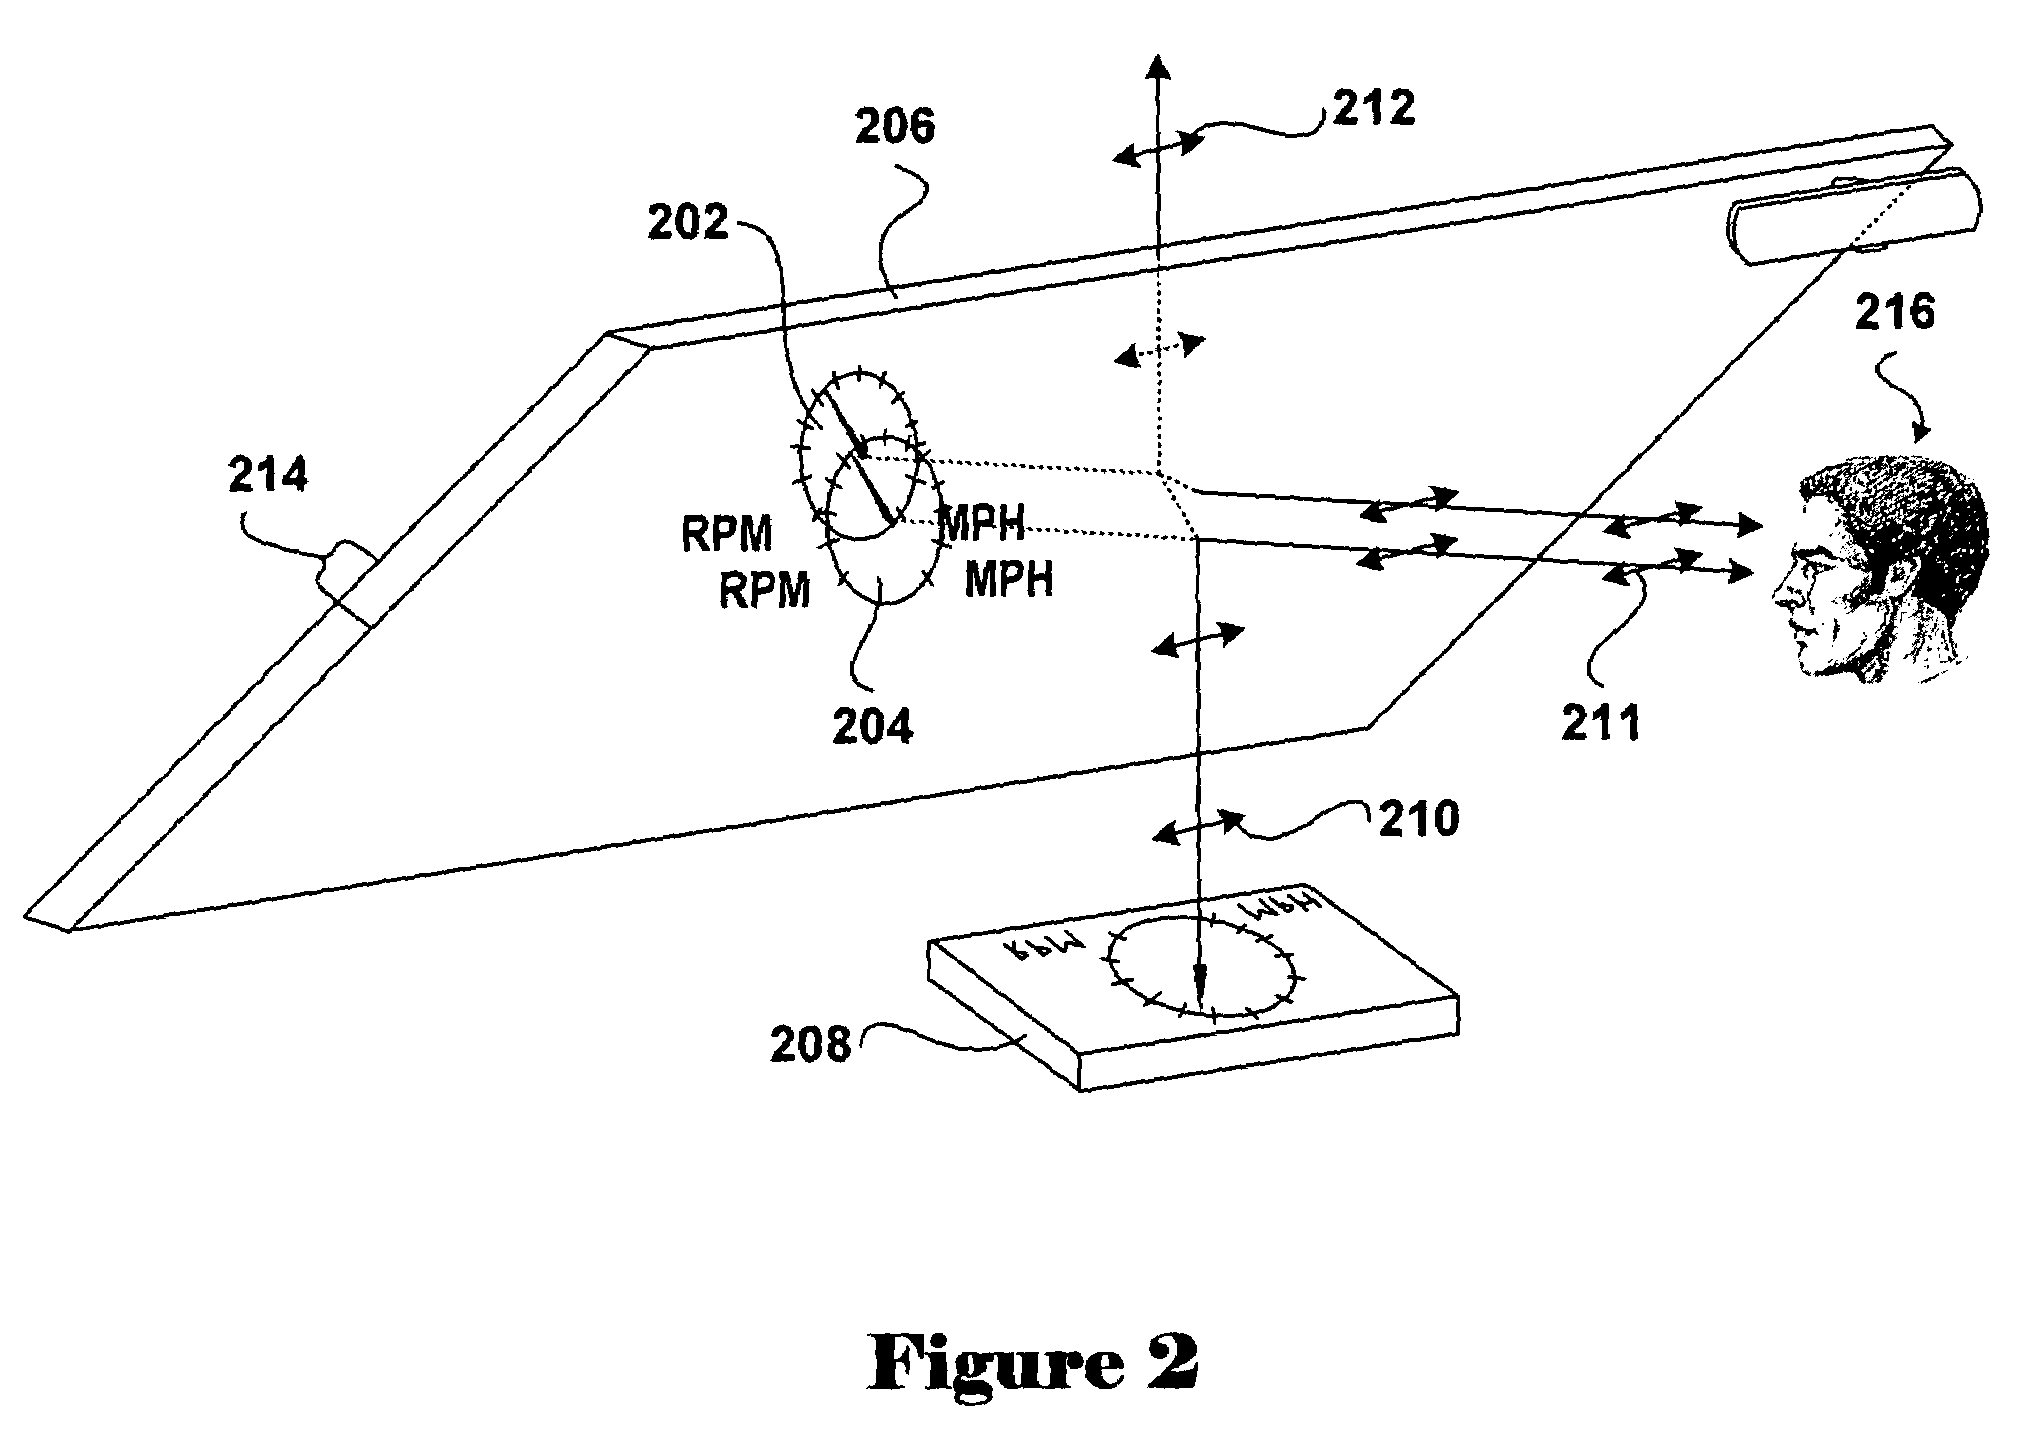 Visual display system for displaying virtual images onto a field of vision